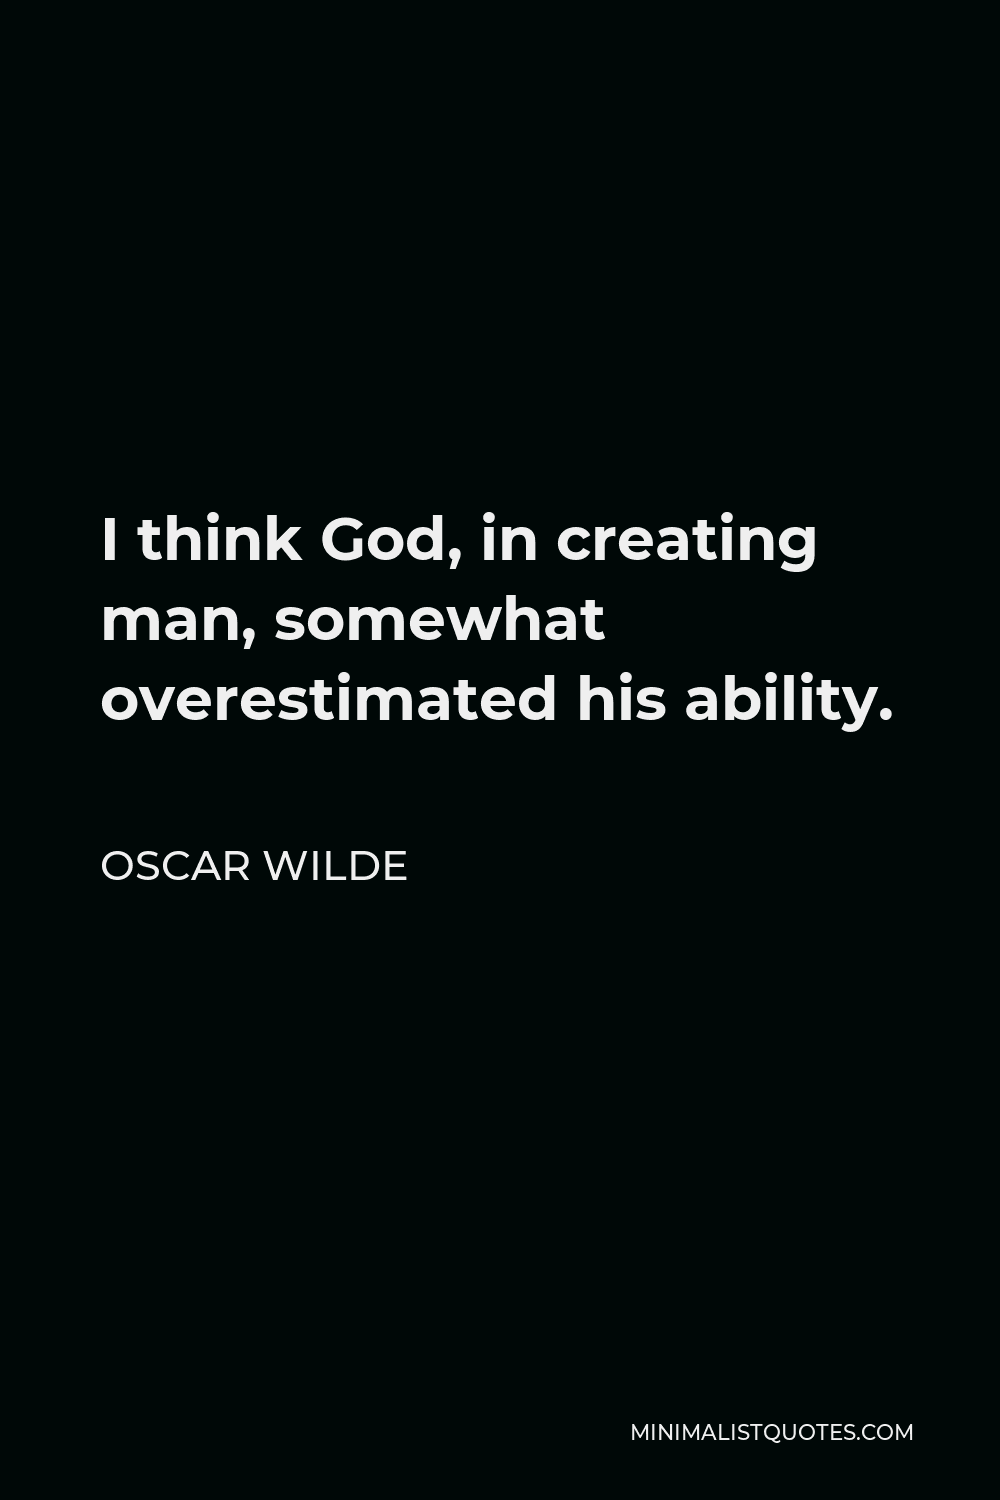 Oscar Wilde Quote: I think God, in creating man, somewhat overestimated ...